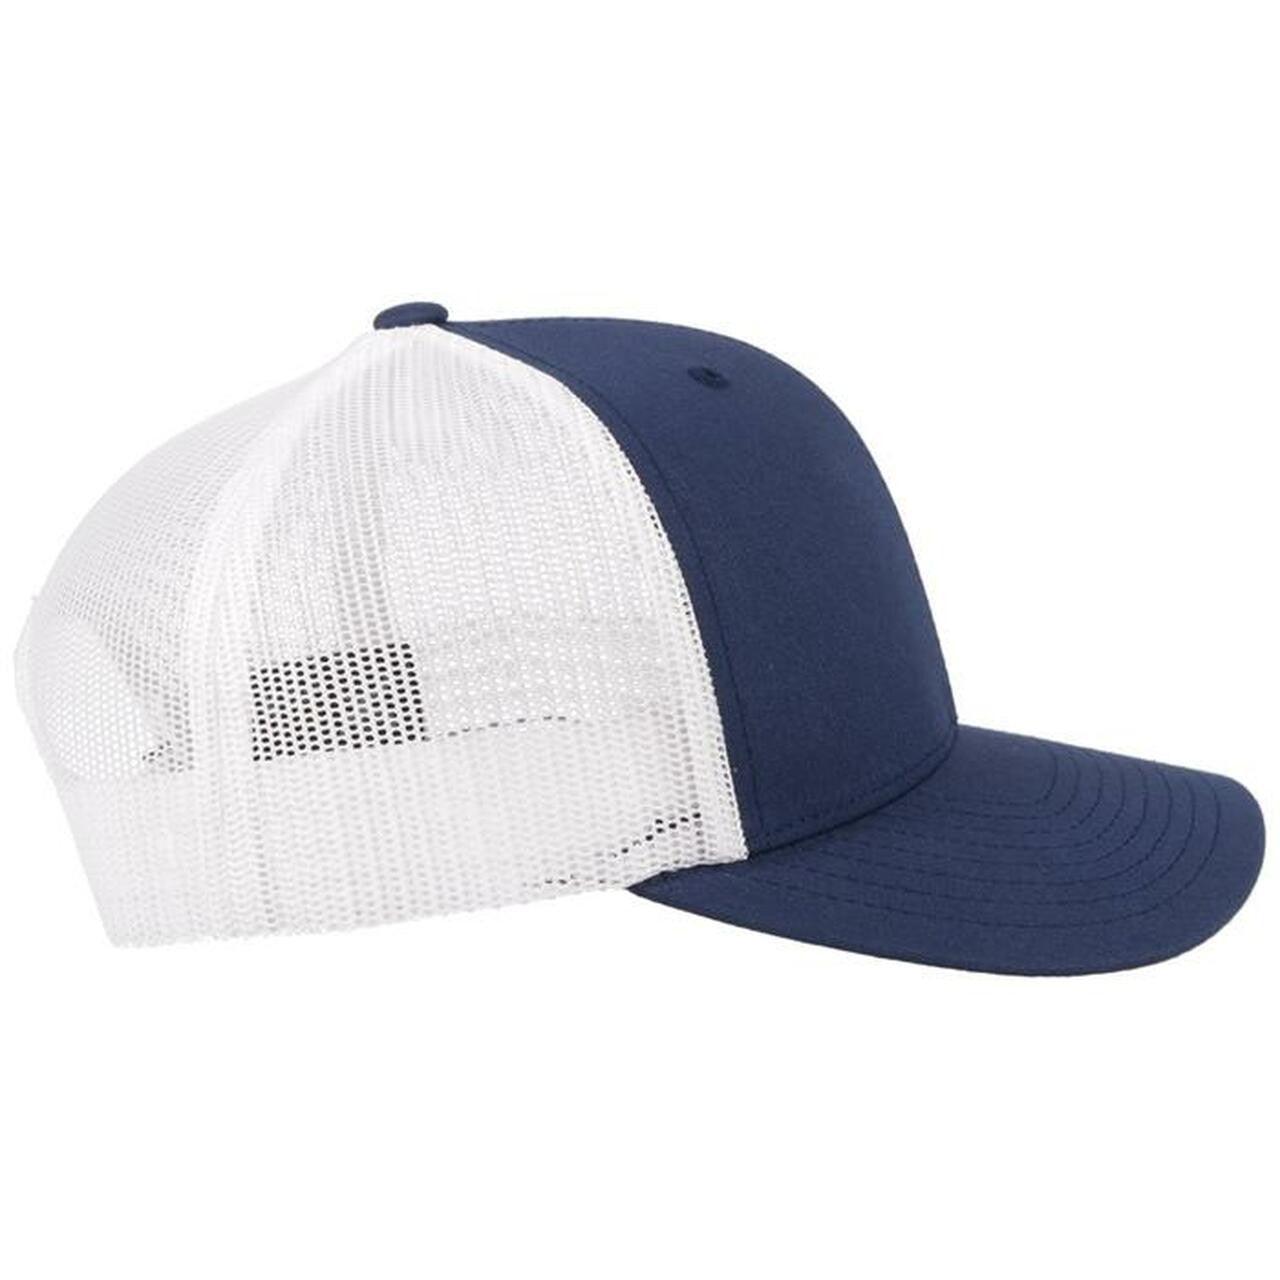 HOG Oil Rig Hat - Navy/White - Purpose-Built / Home of the Trades